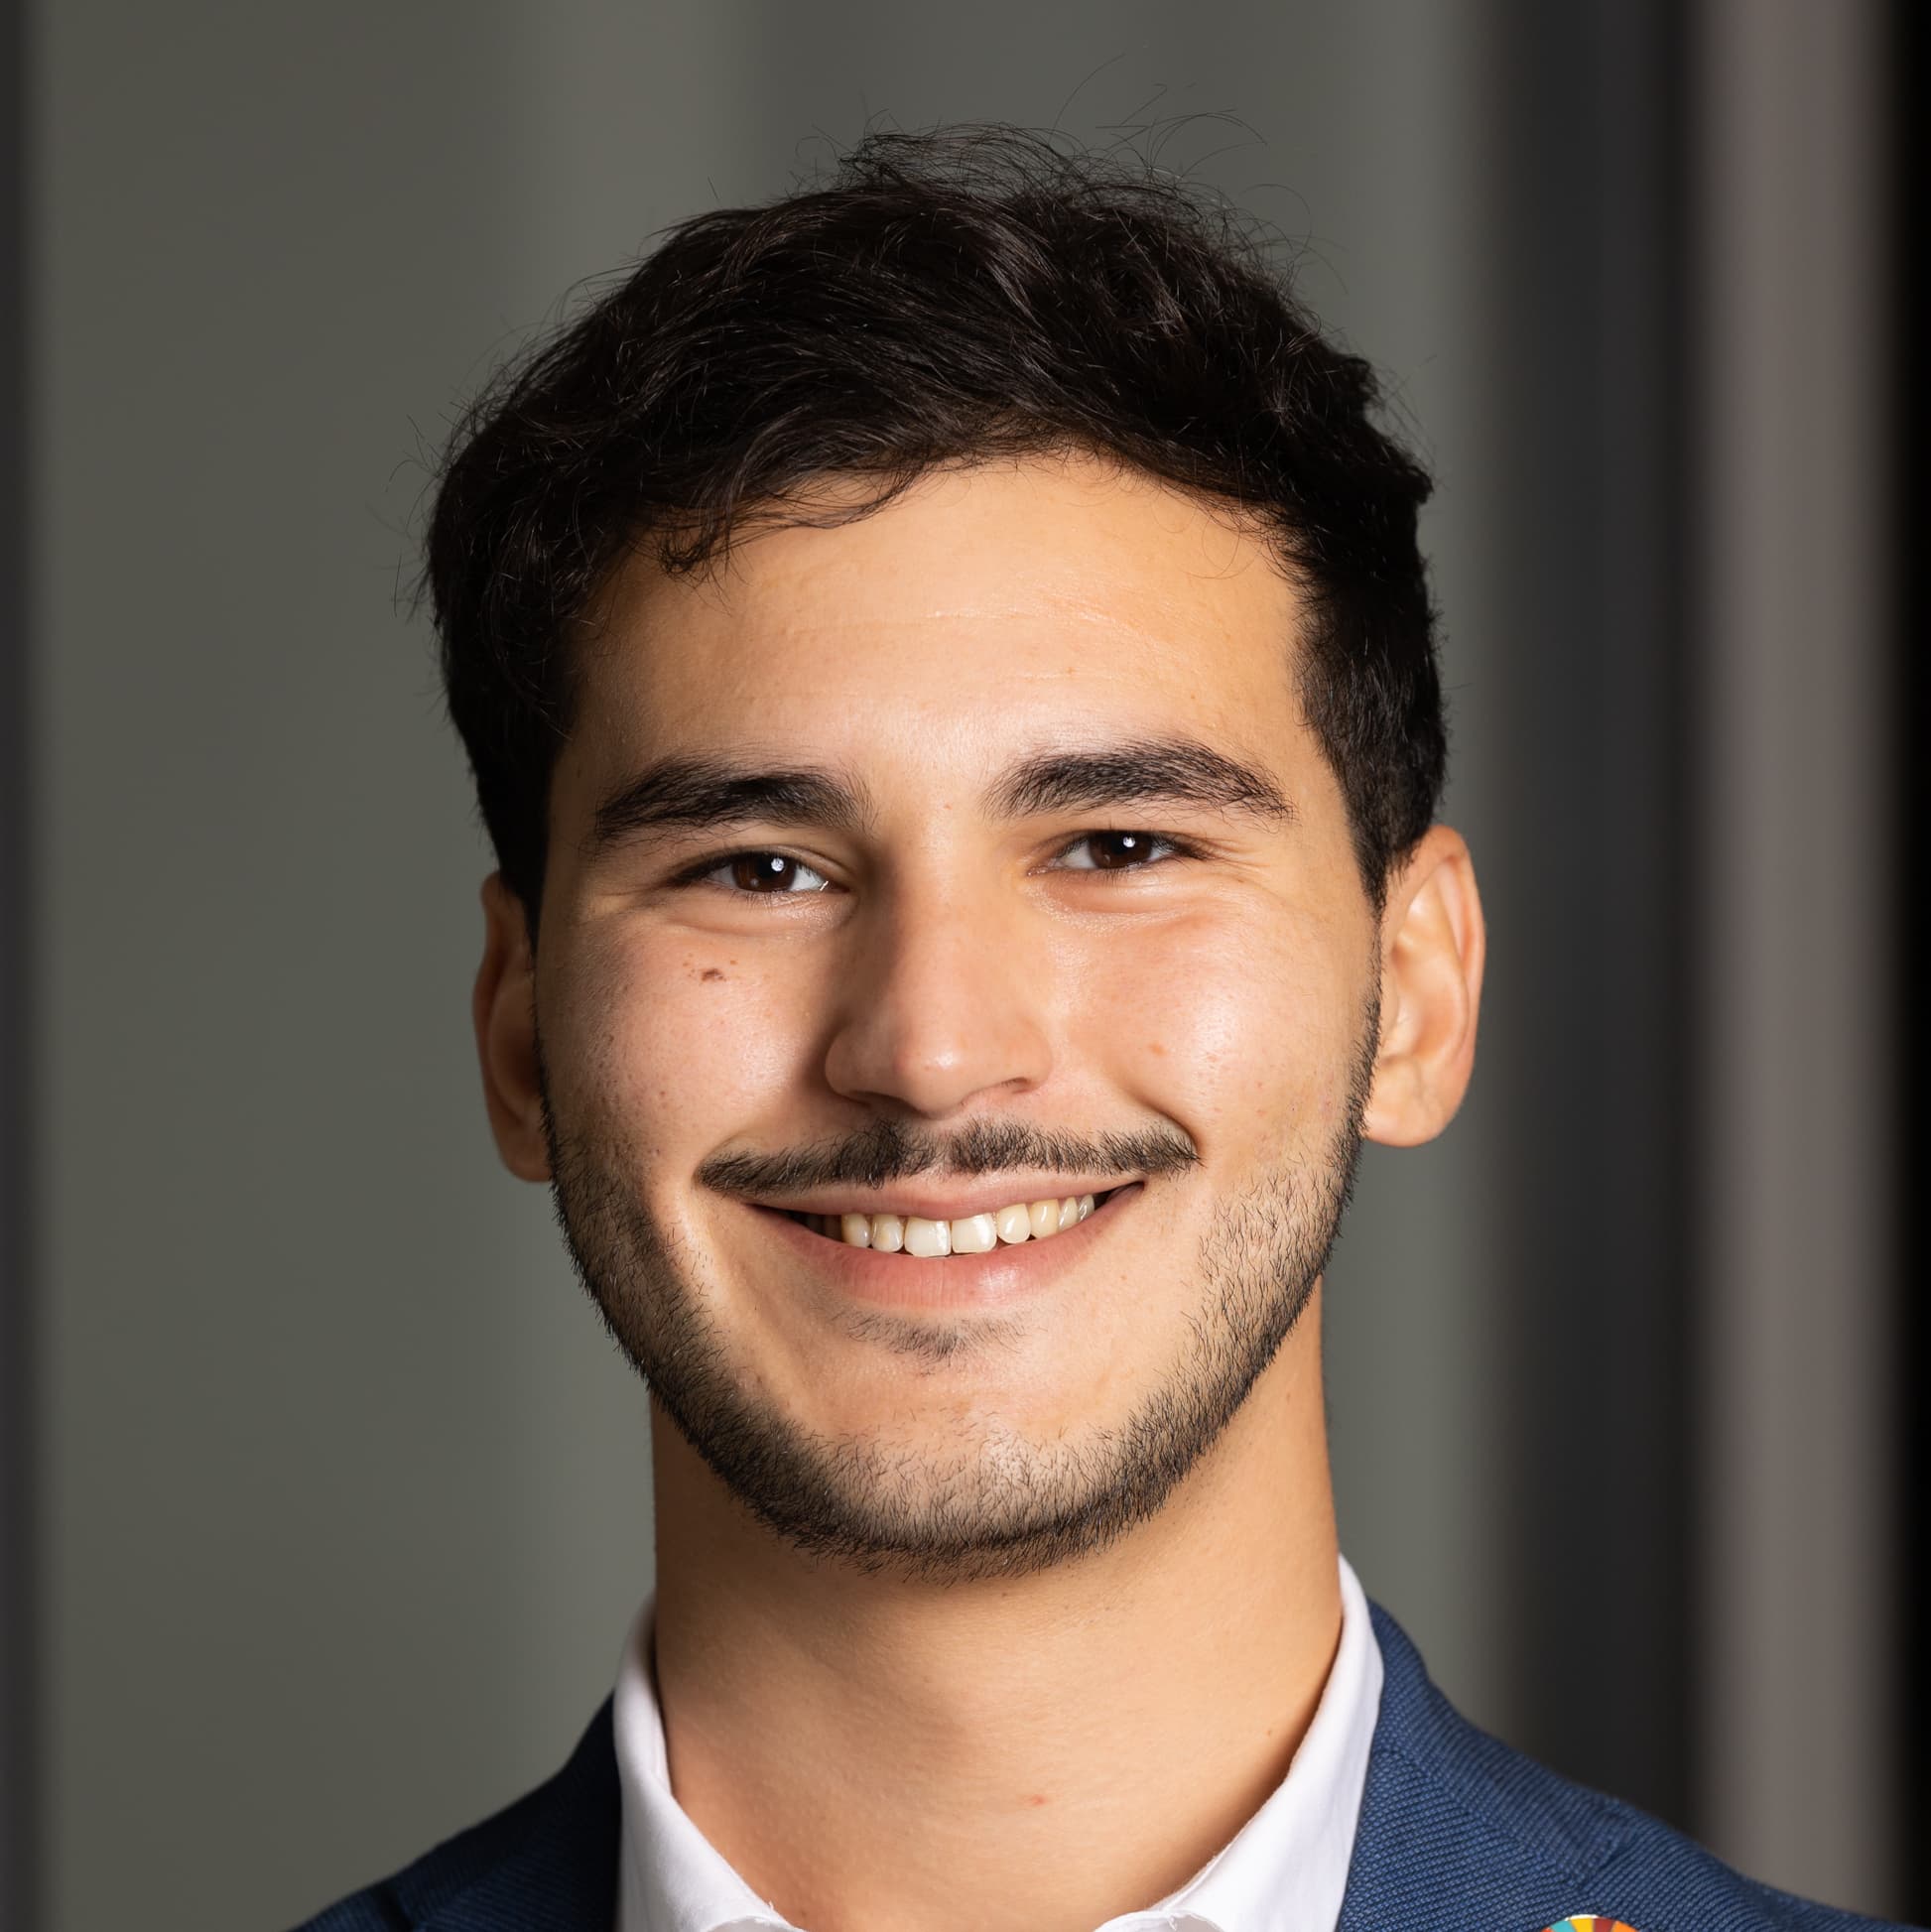 Mehdi, Sales Manager & Blockchain Lead at GO2 Markets